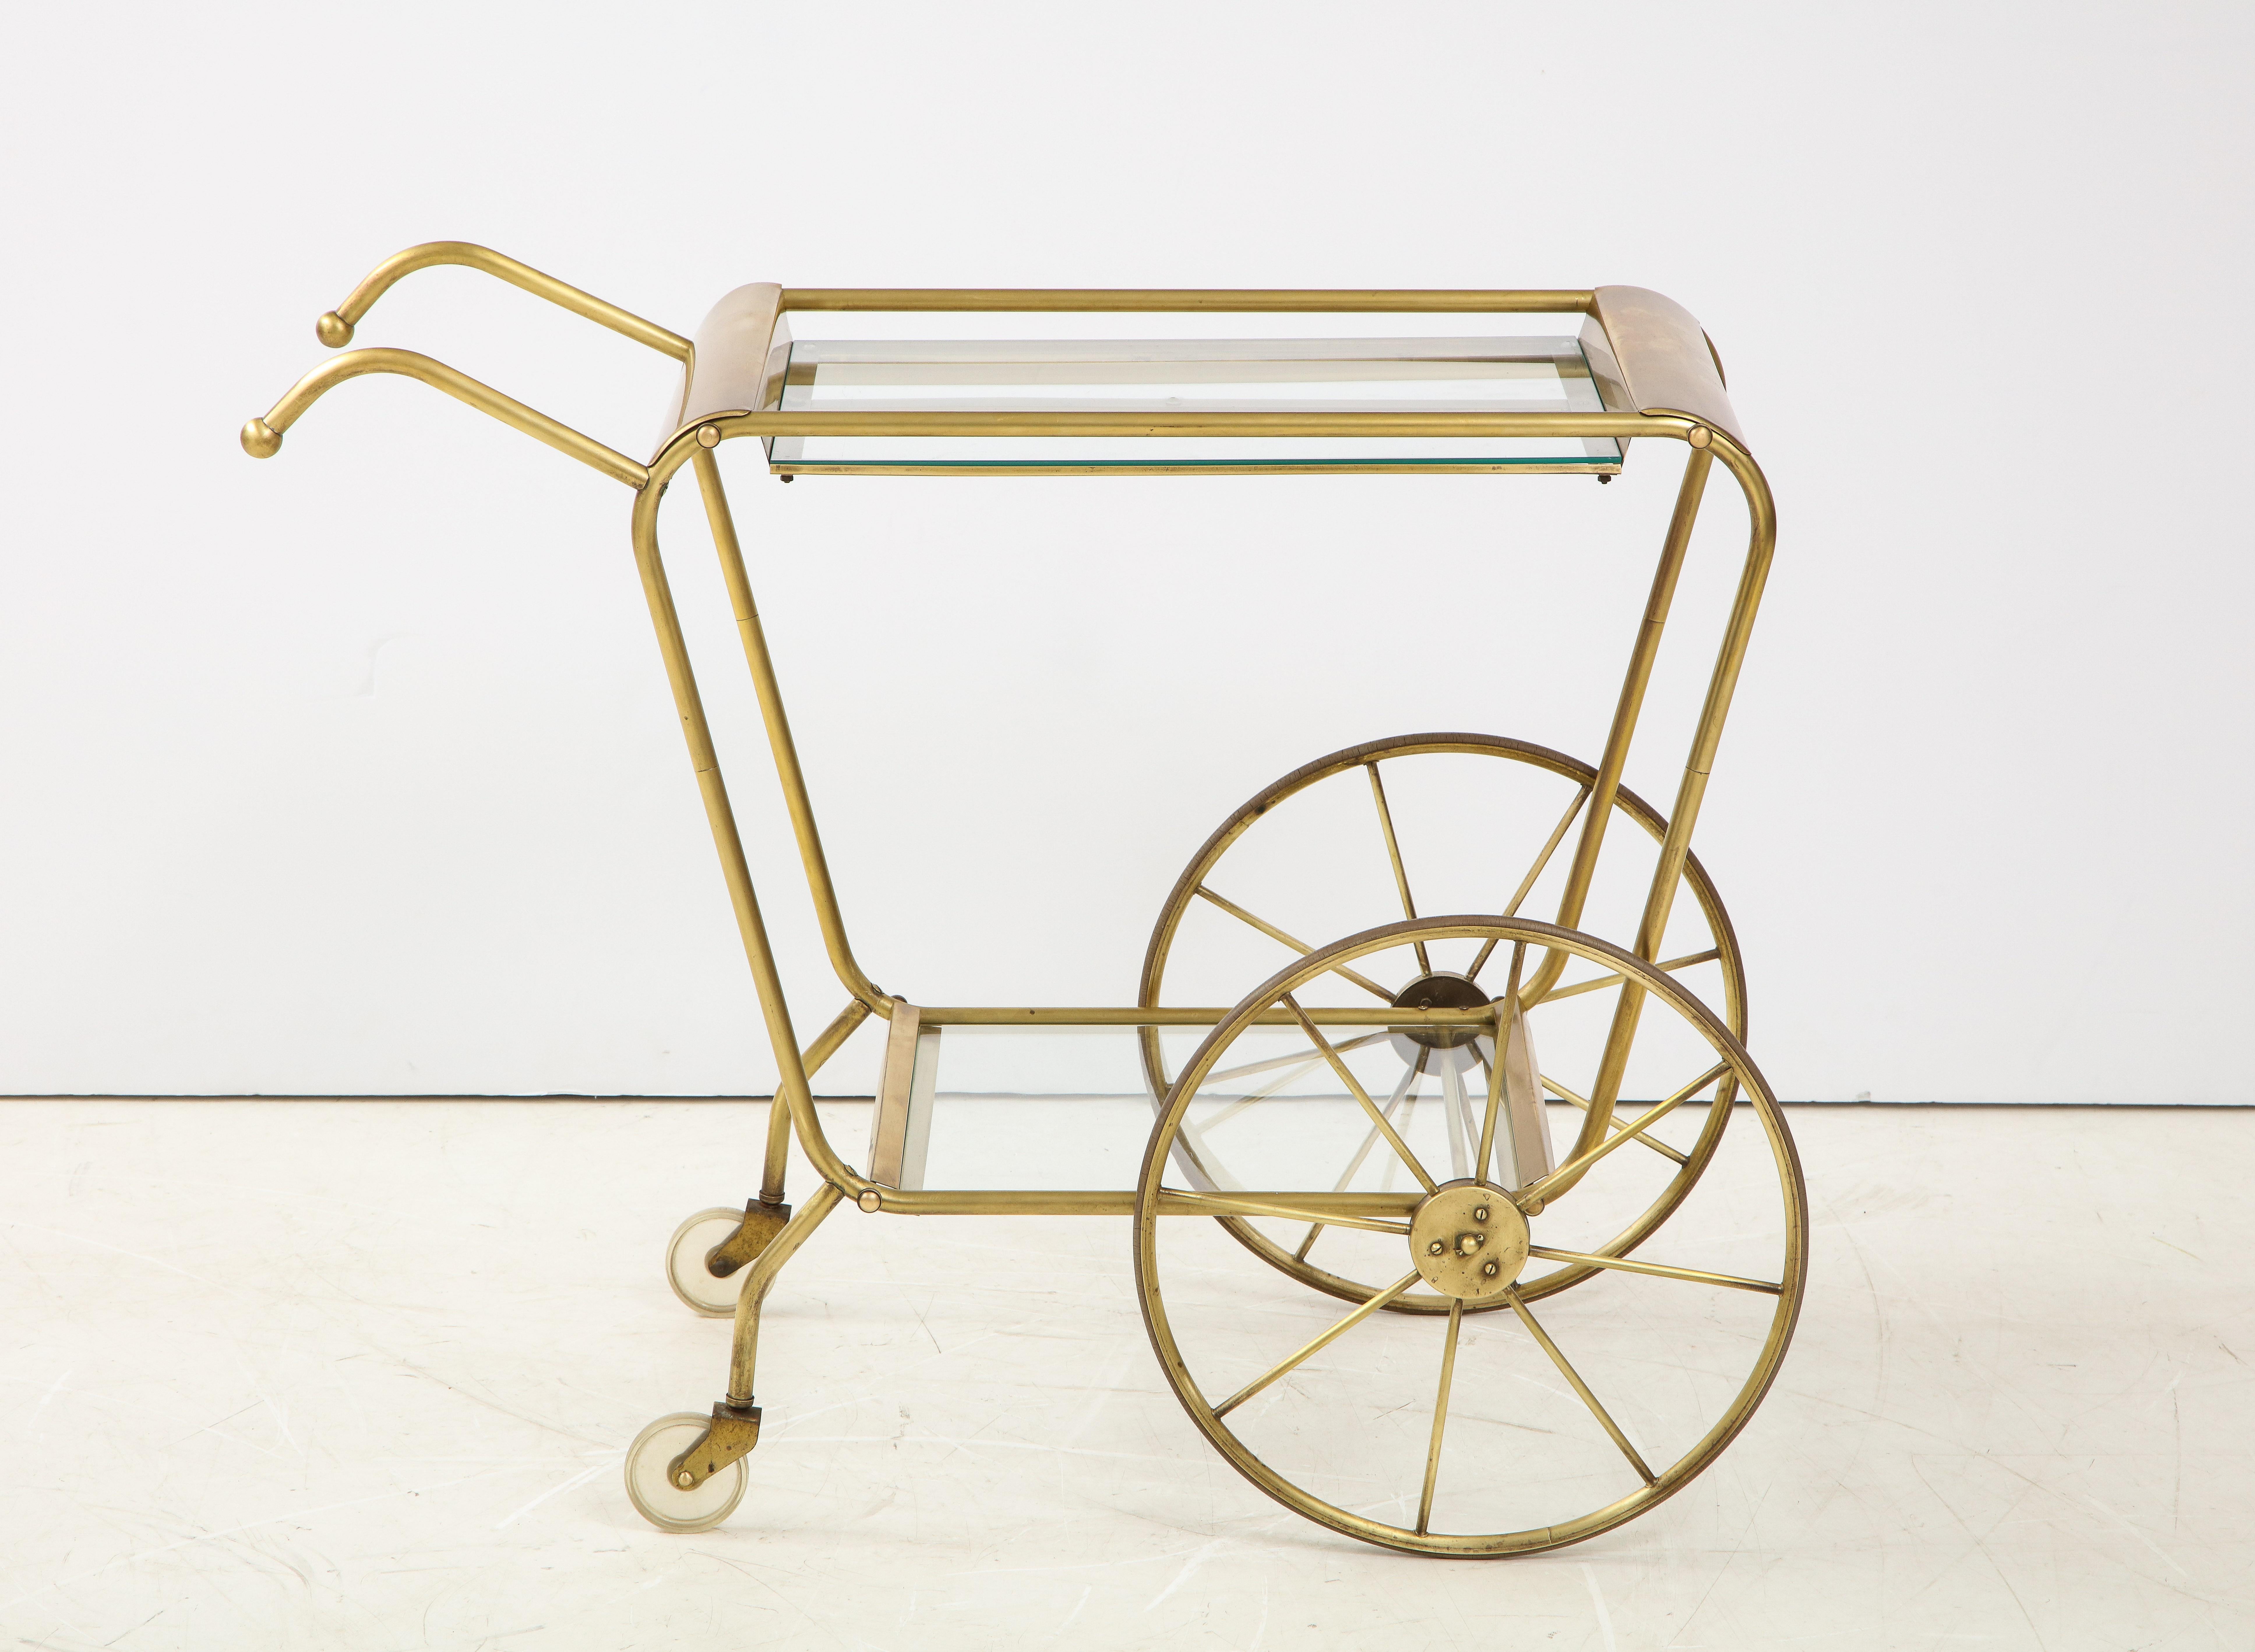 1950s Mid-Century Modern solid brass Italian bar cart, lightly hand polished with some wear and patina to the brass.